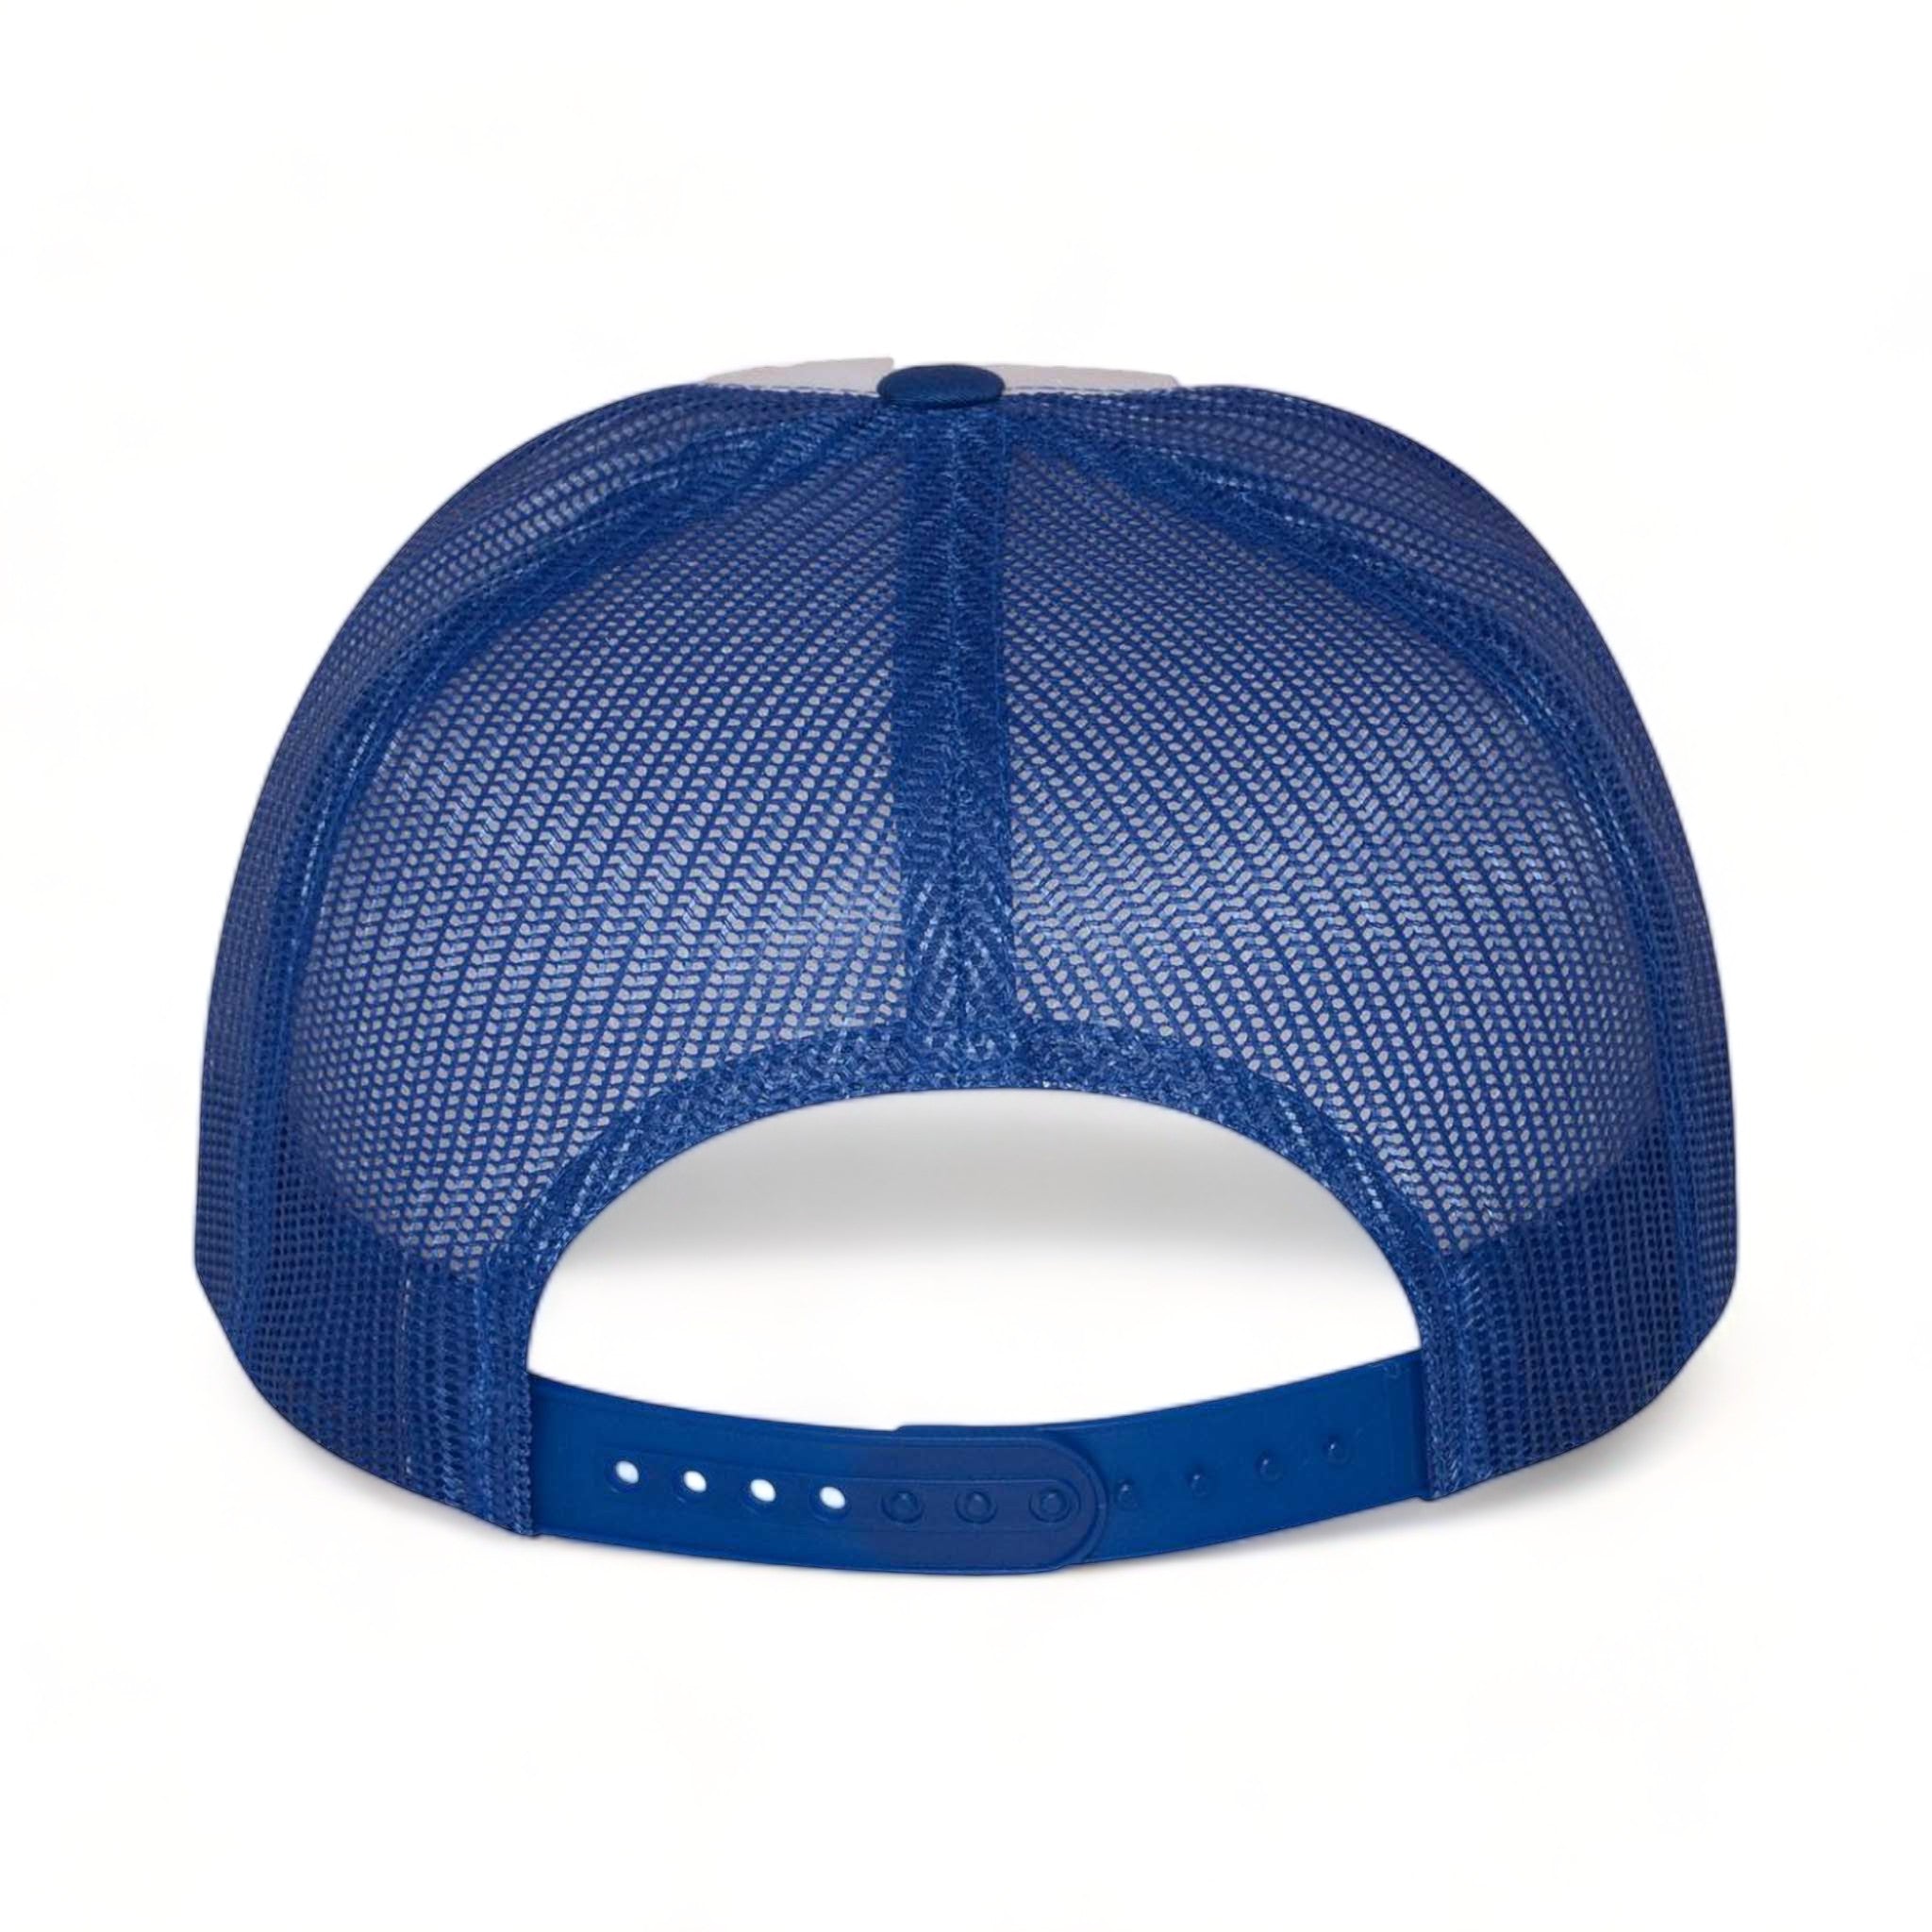 Back view of YP Classics 6006 custom hat in royal, white and royal